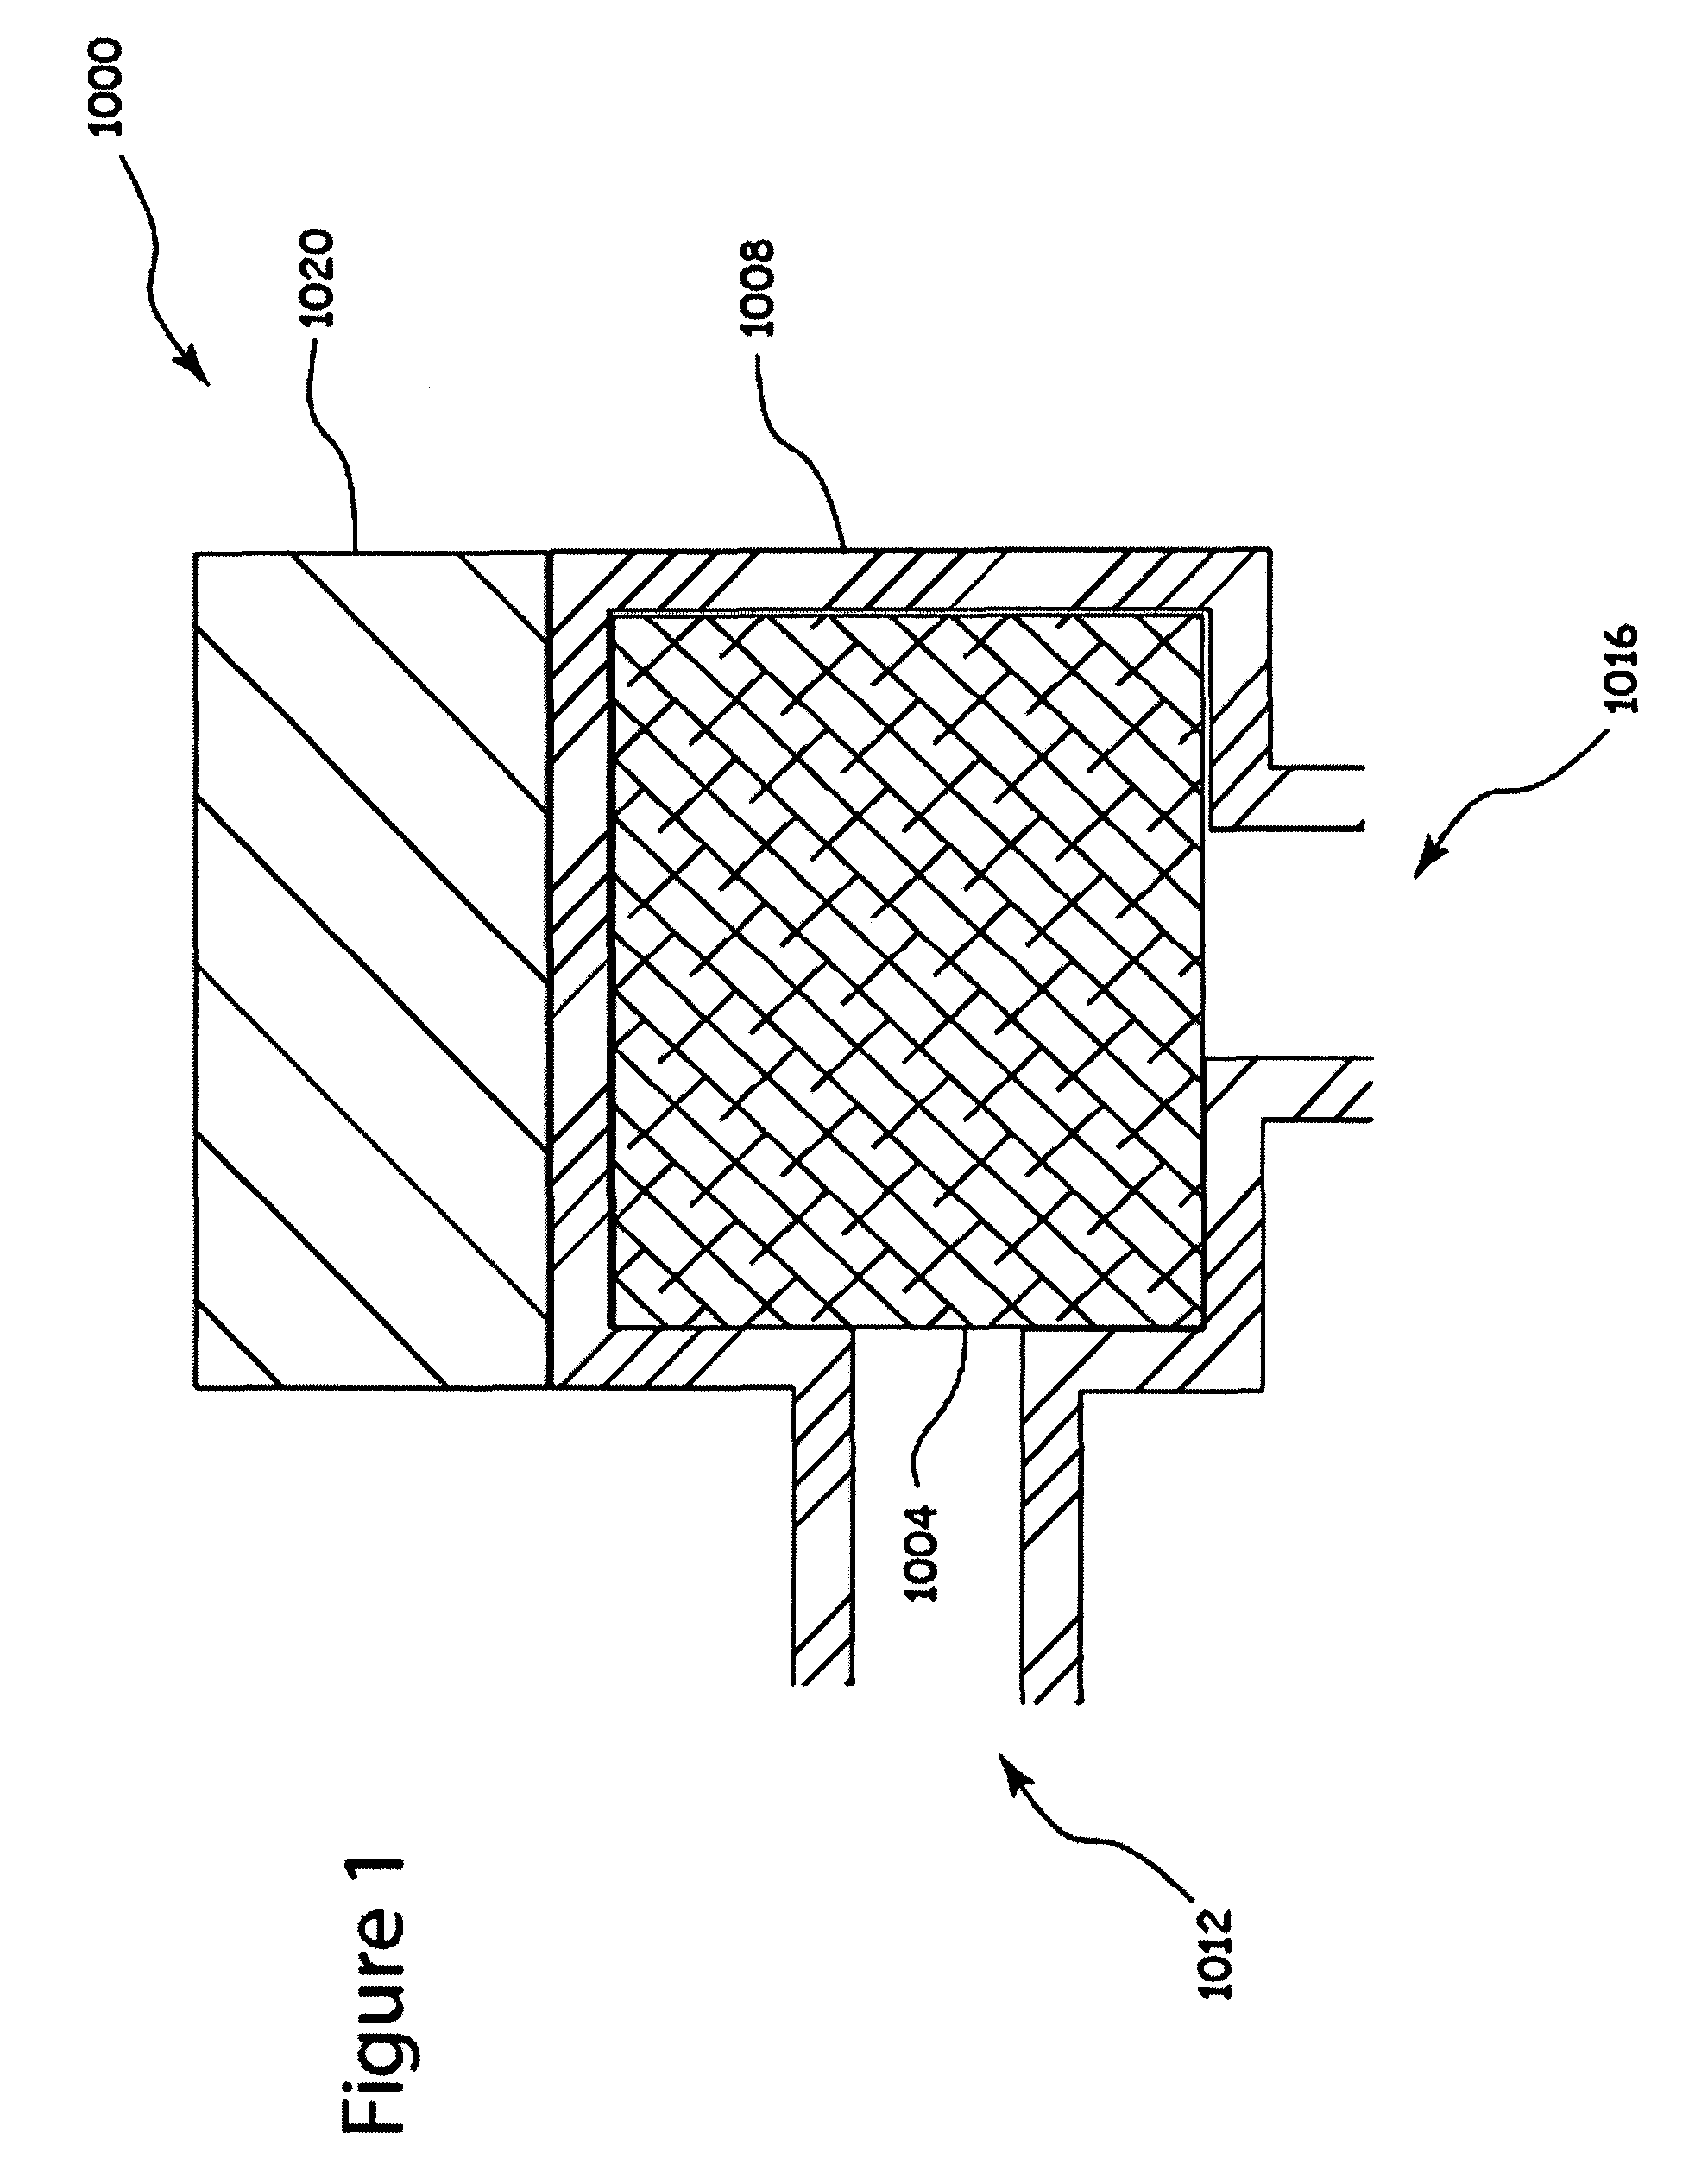 Apparatus, system, and method for purifying nucleic acids